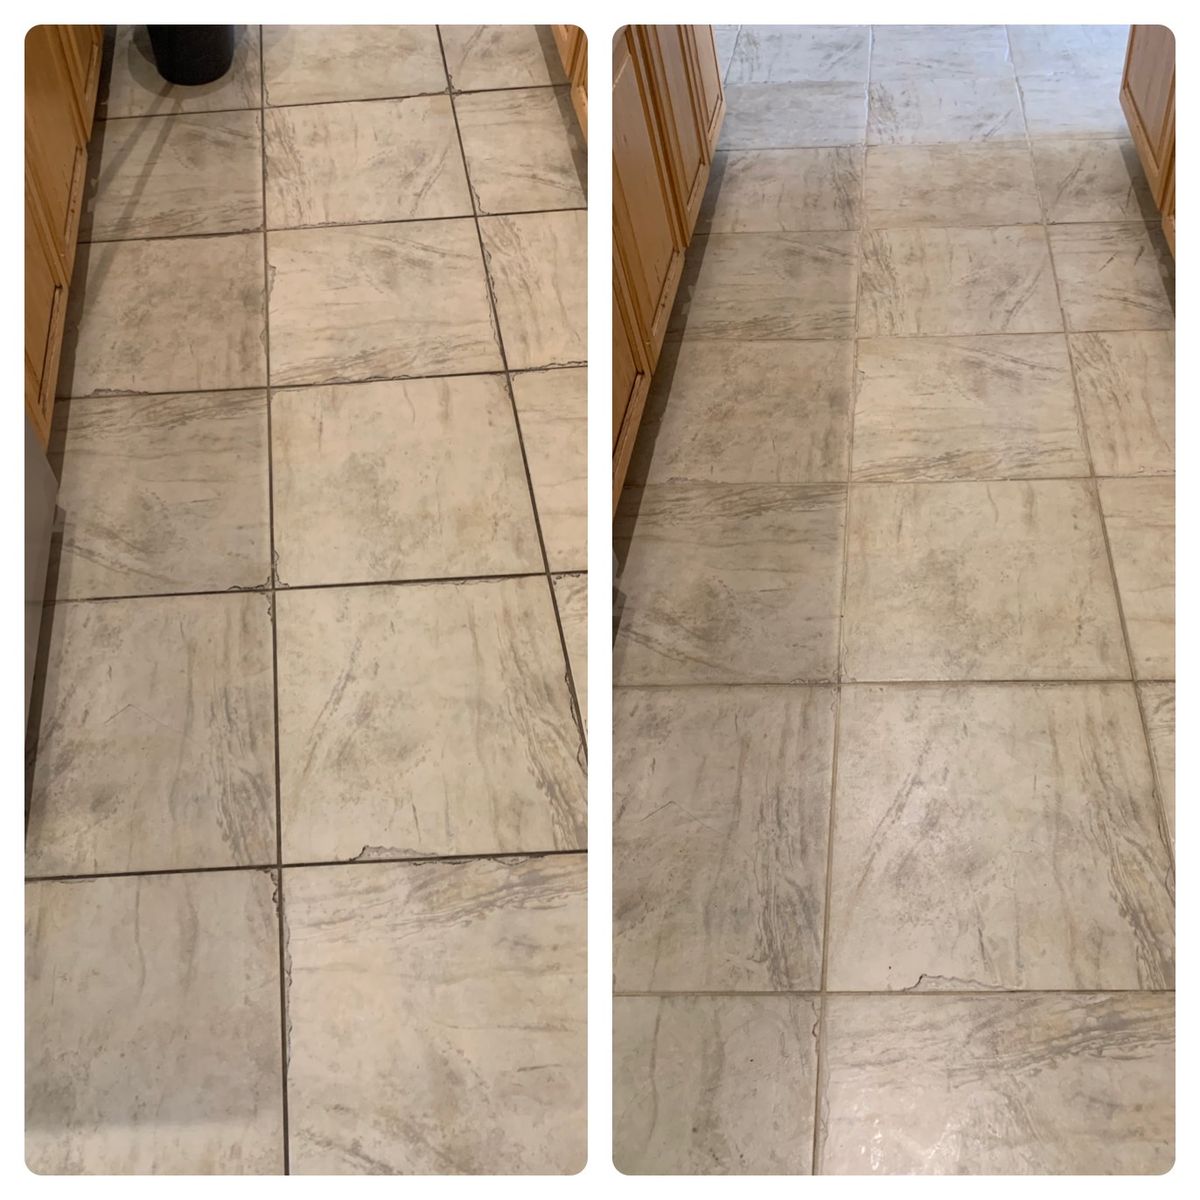 Tile Grout Cleaning for BCB Cleaning Services in Corona, CA